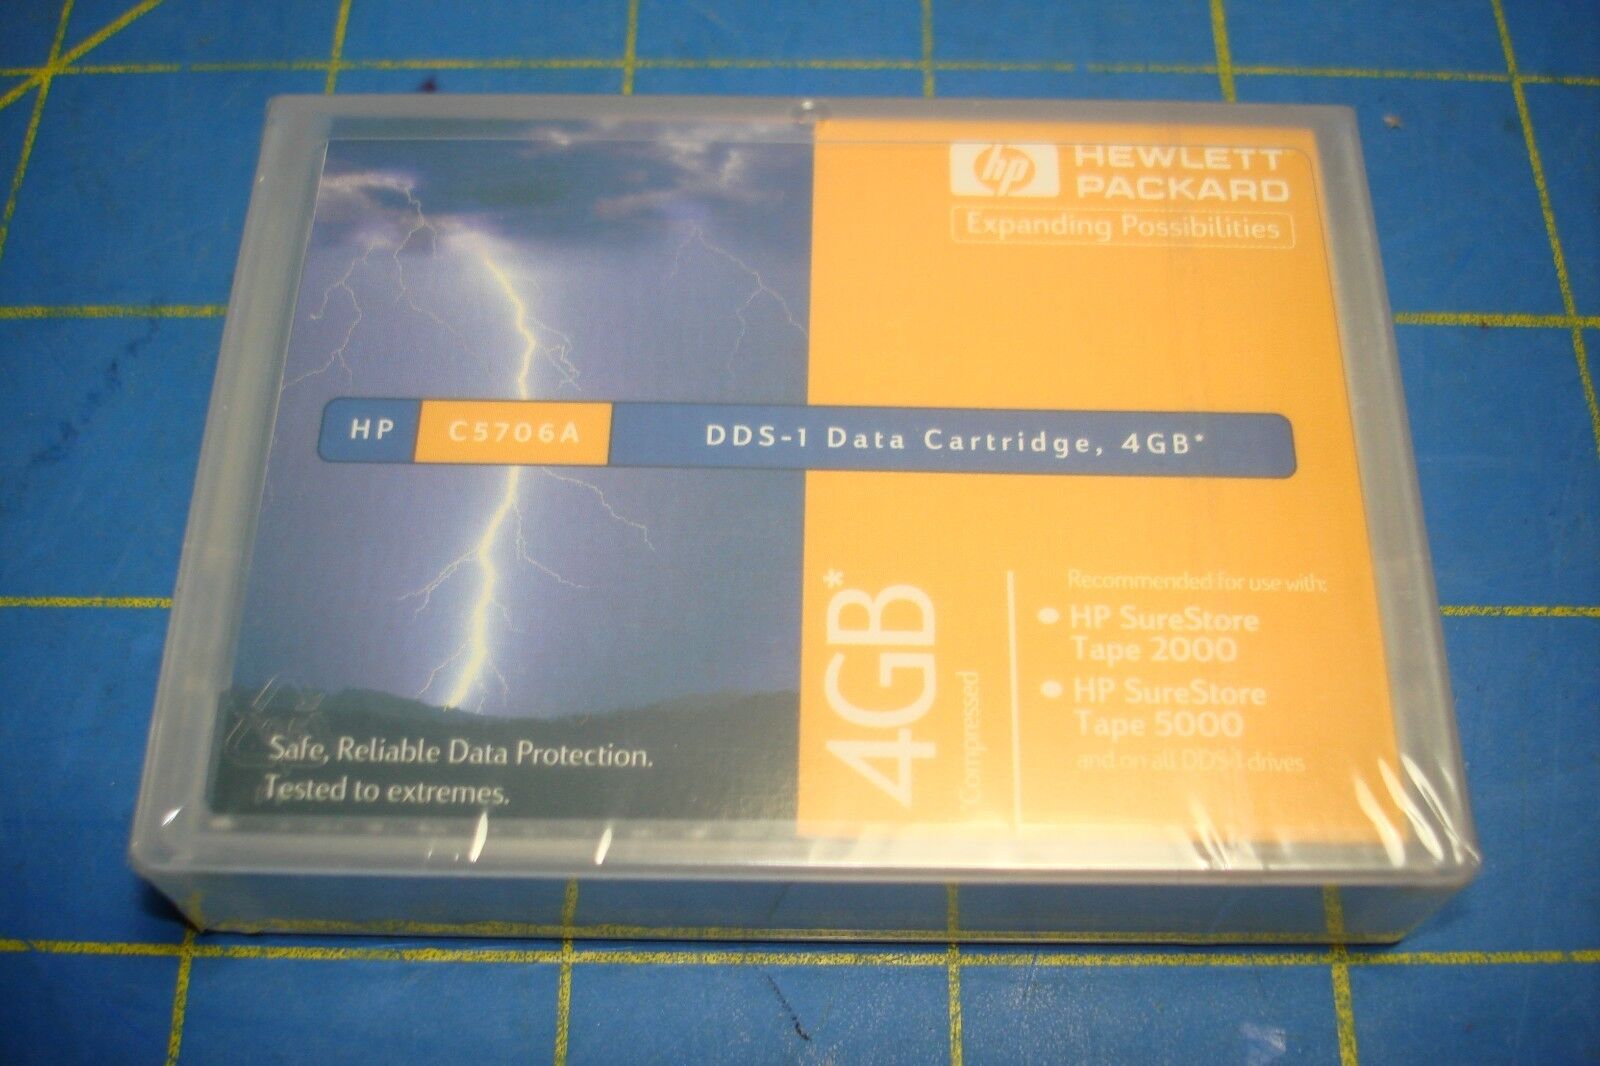 HP C5706A DDS-1 DATA CARTRIDGE 4GB NEW FACTORY SEALED NEVER OPENED